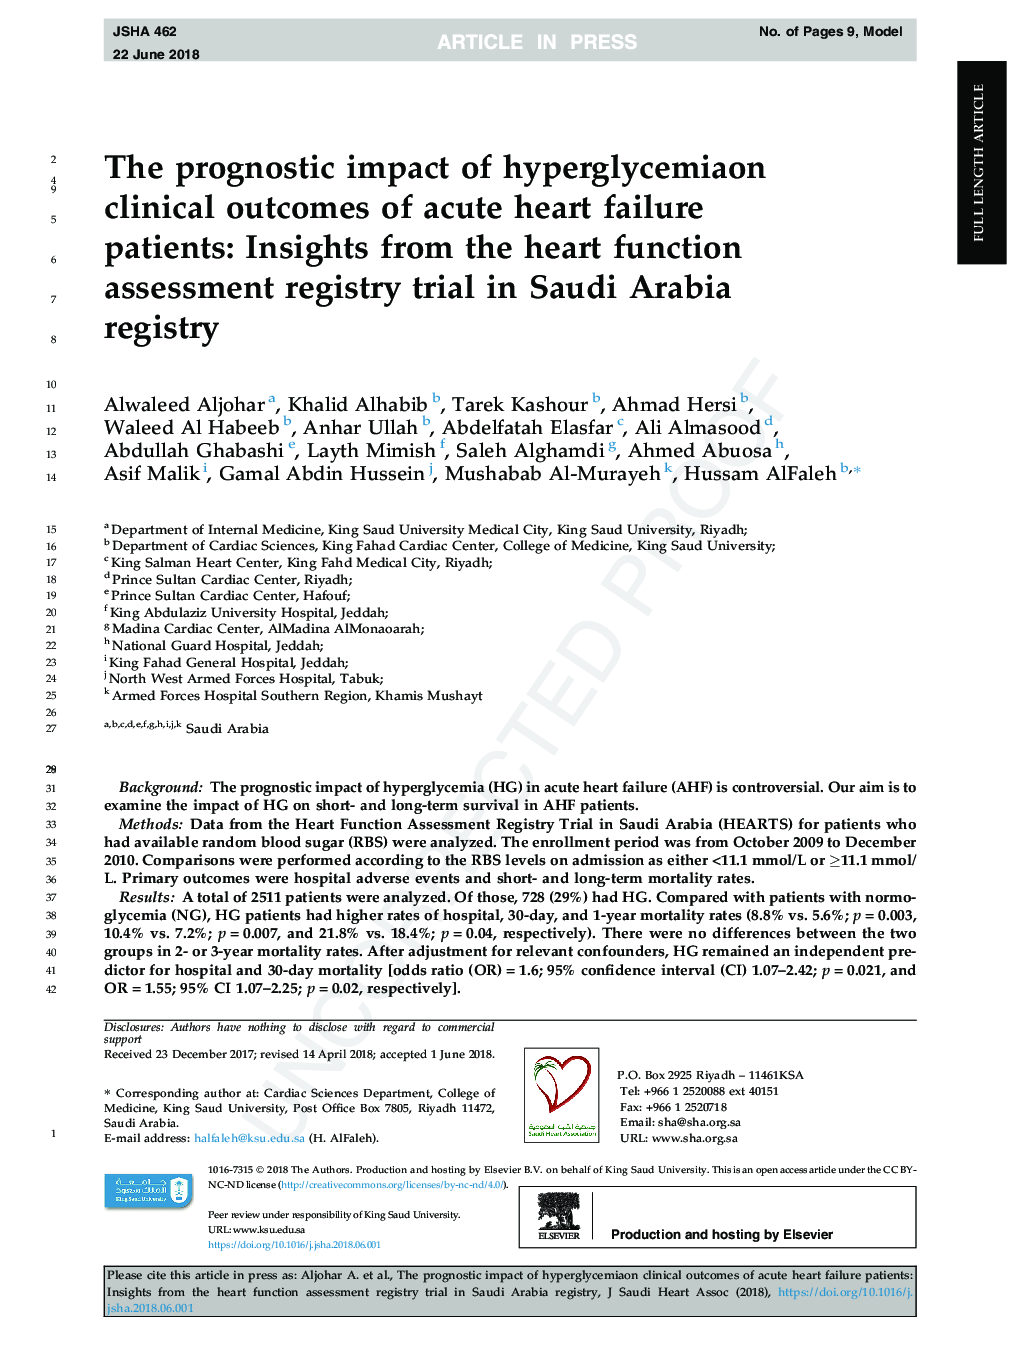 The prognostic impact of hyperglycemia on clinical outcomes of acute heart failure: Insights from the heart function assessment registry trial in Saudi Arabia